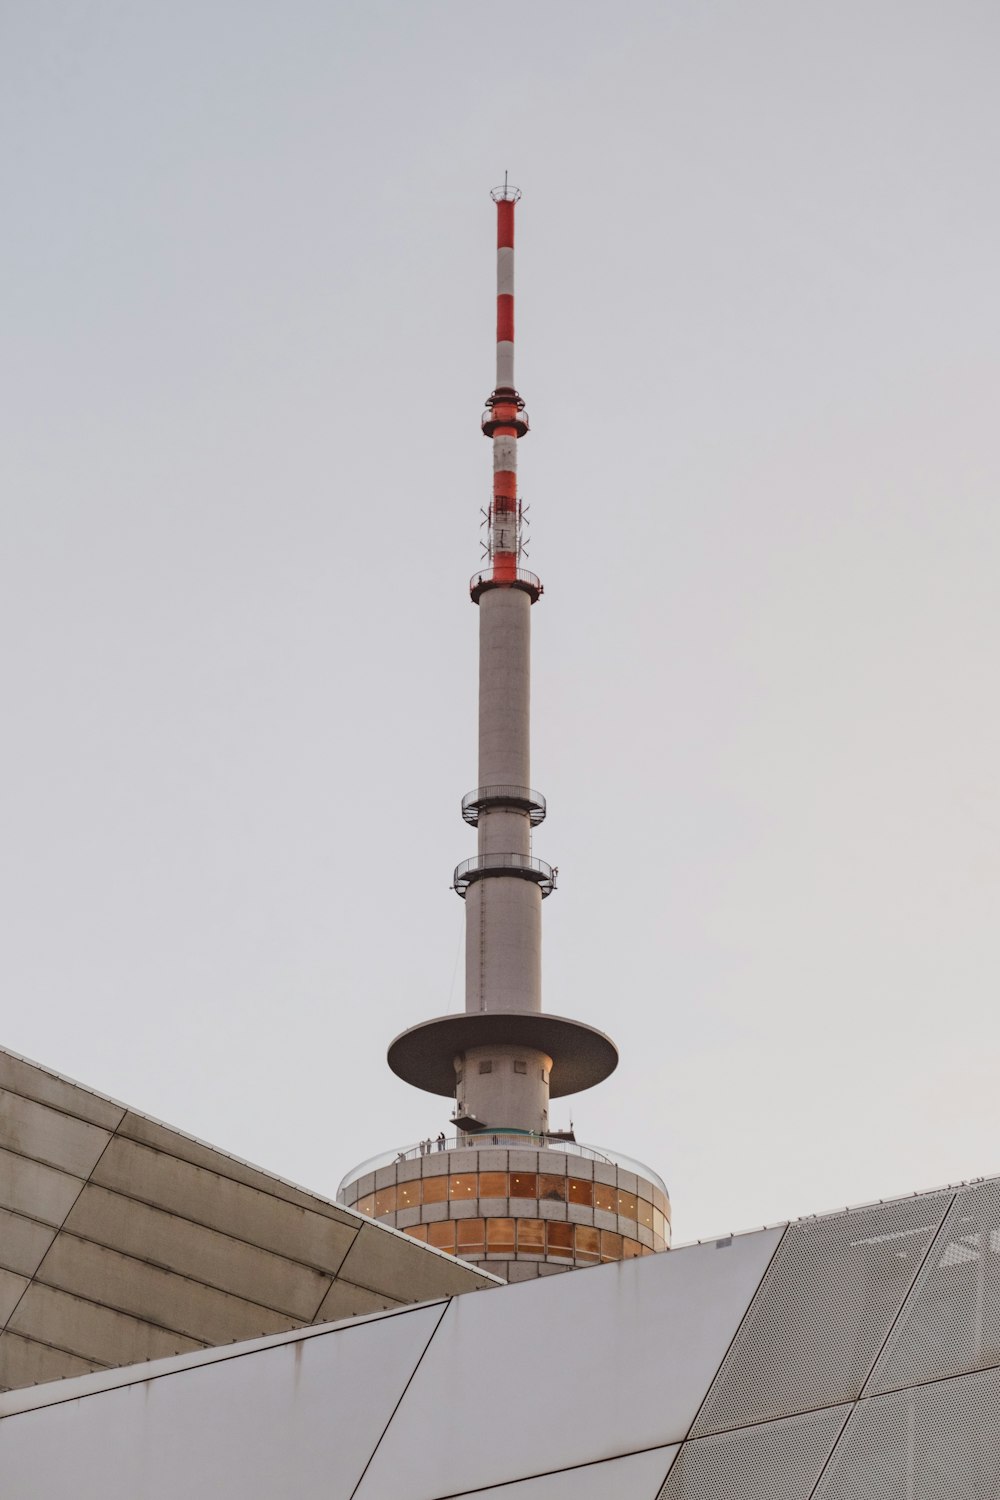 a tall tower with a red and white flag on top of it